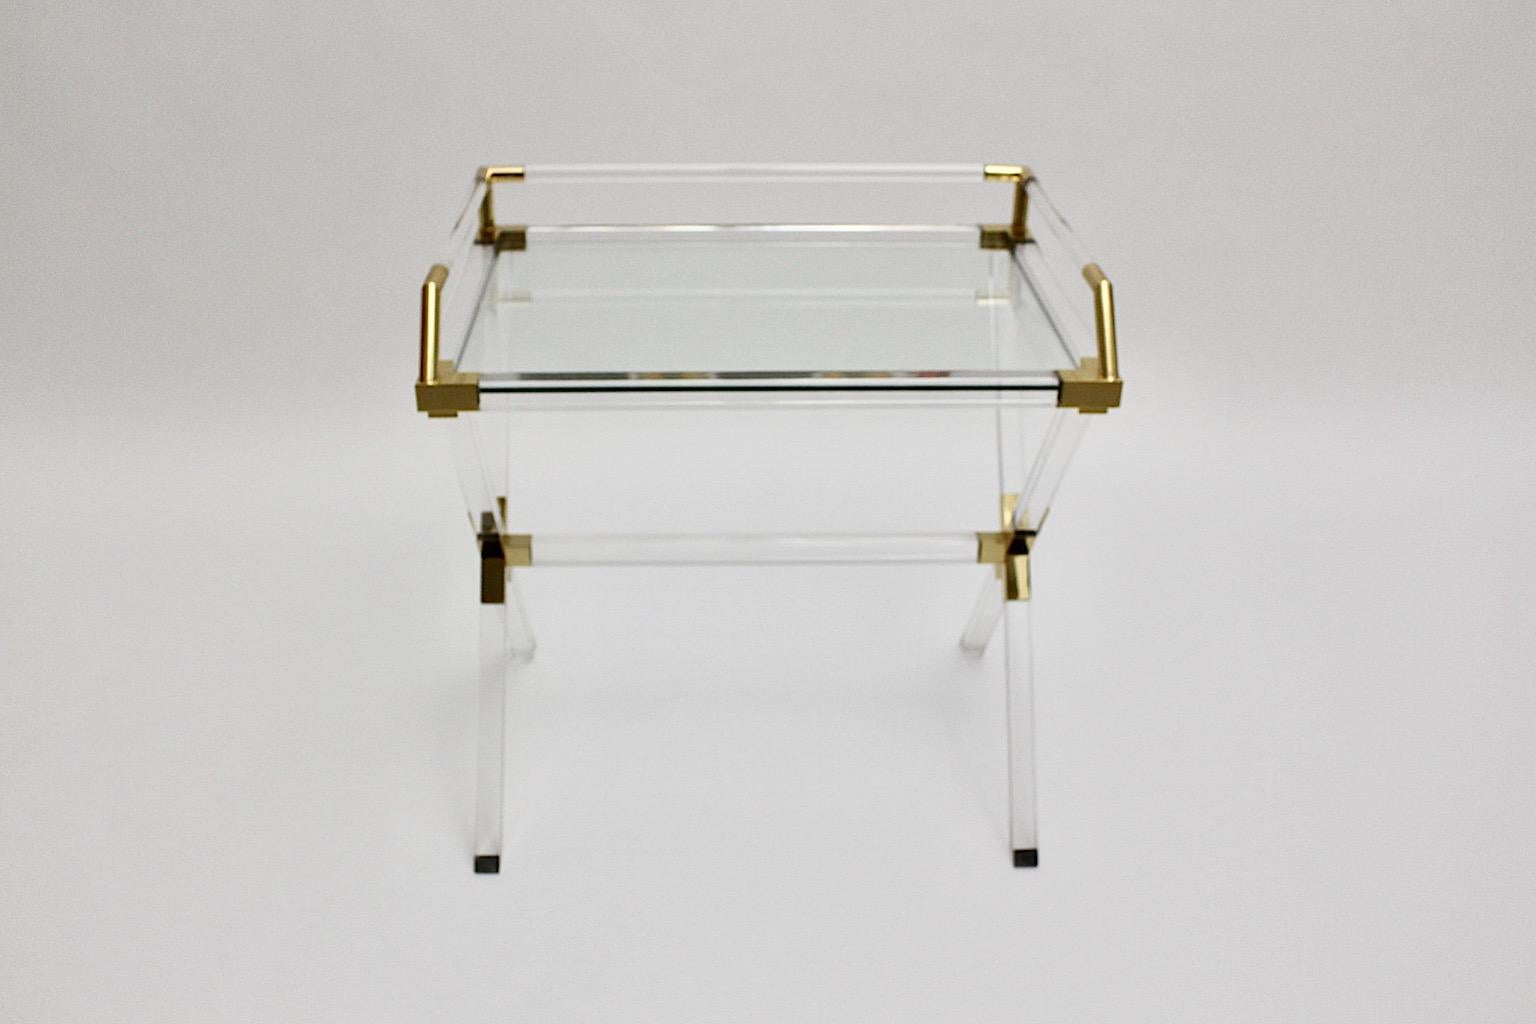 Modern vintage serving table or  side table or Lady´s desk from lucite in clear and gold color Italy, 1970s.
A charming side table or small desk from lucite with a lucite body and golden colored corners and details. While the x crossed feet provides